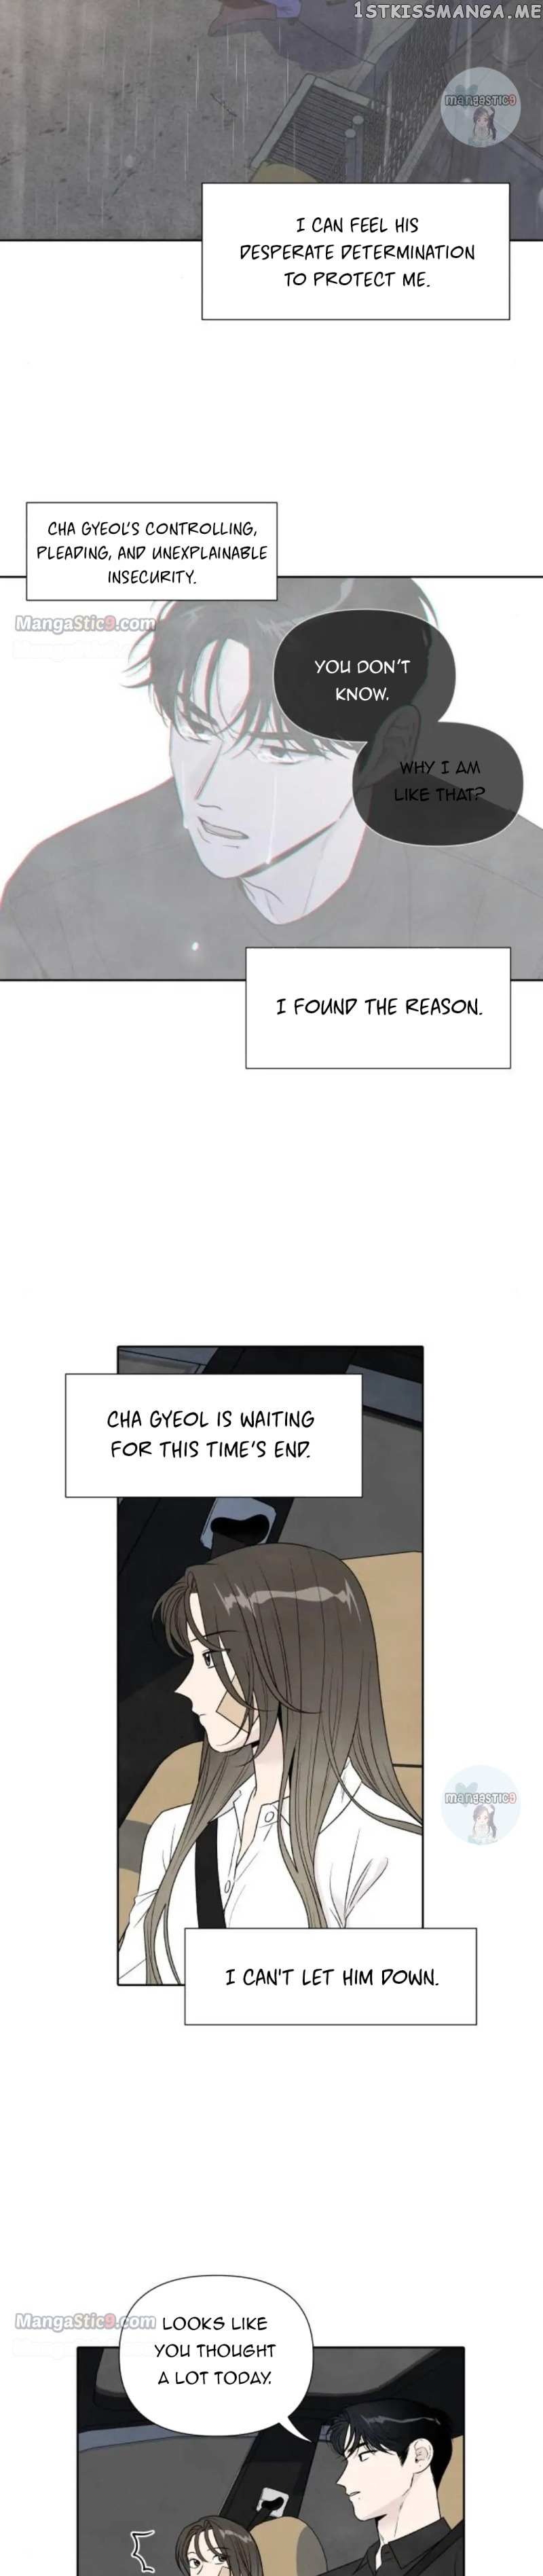 What I Decided To Die For - Page 4